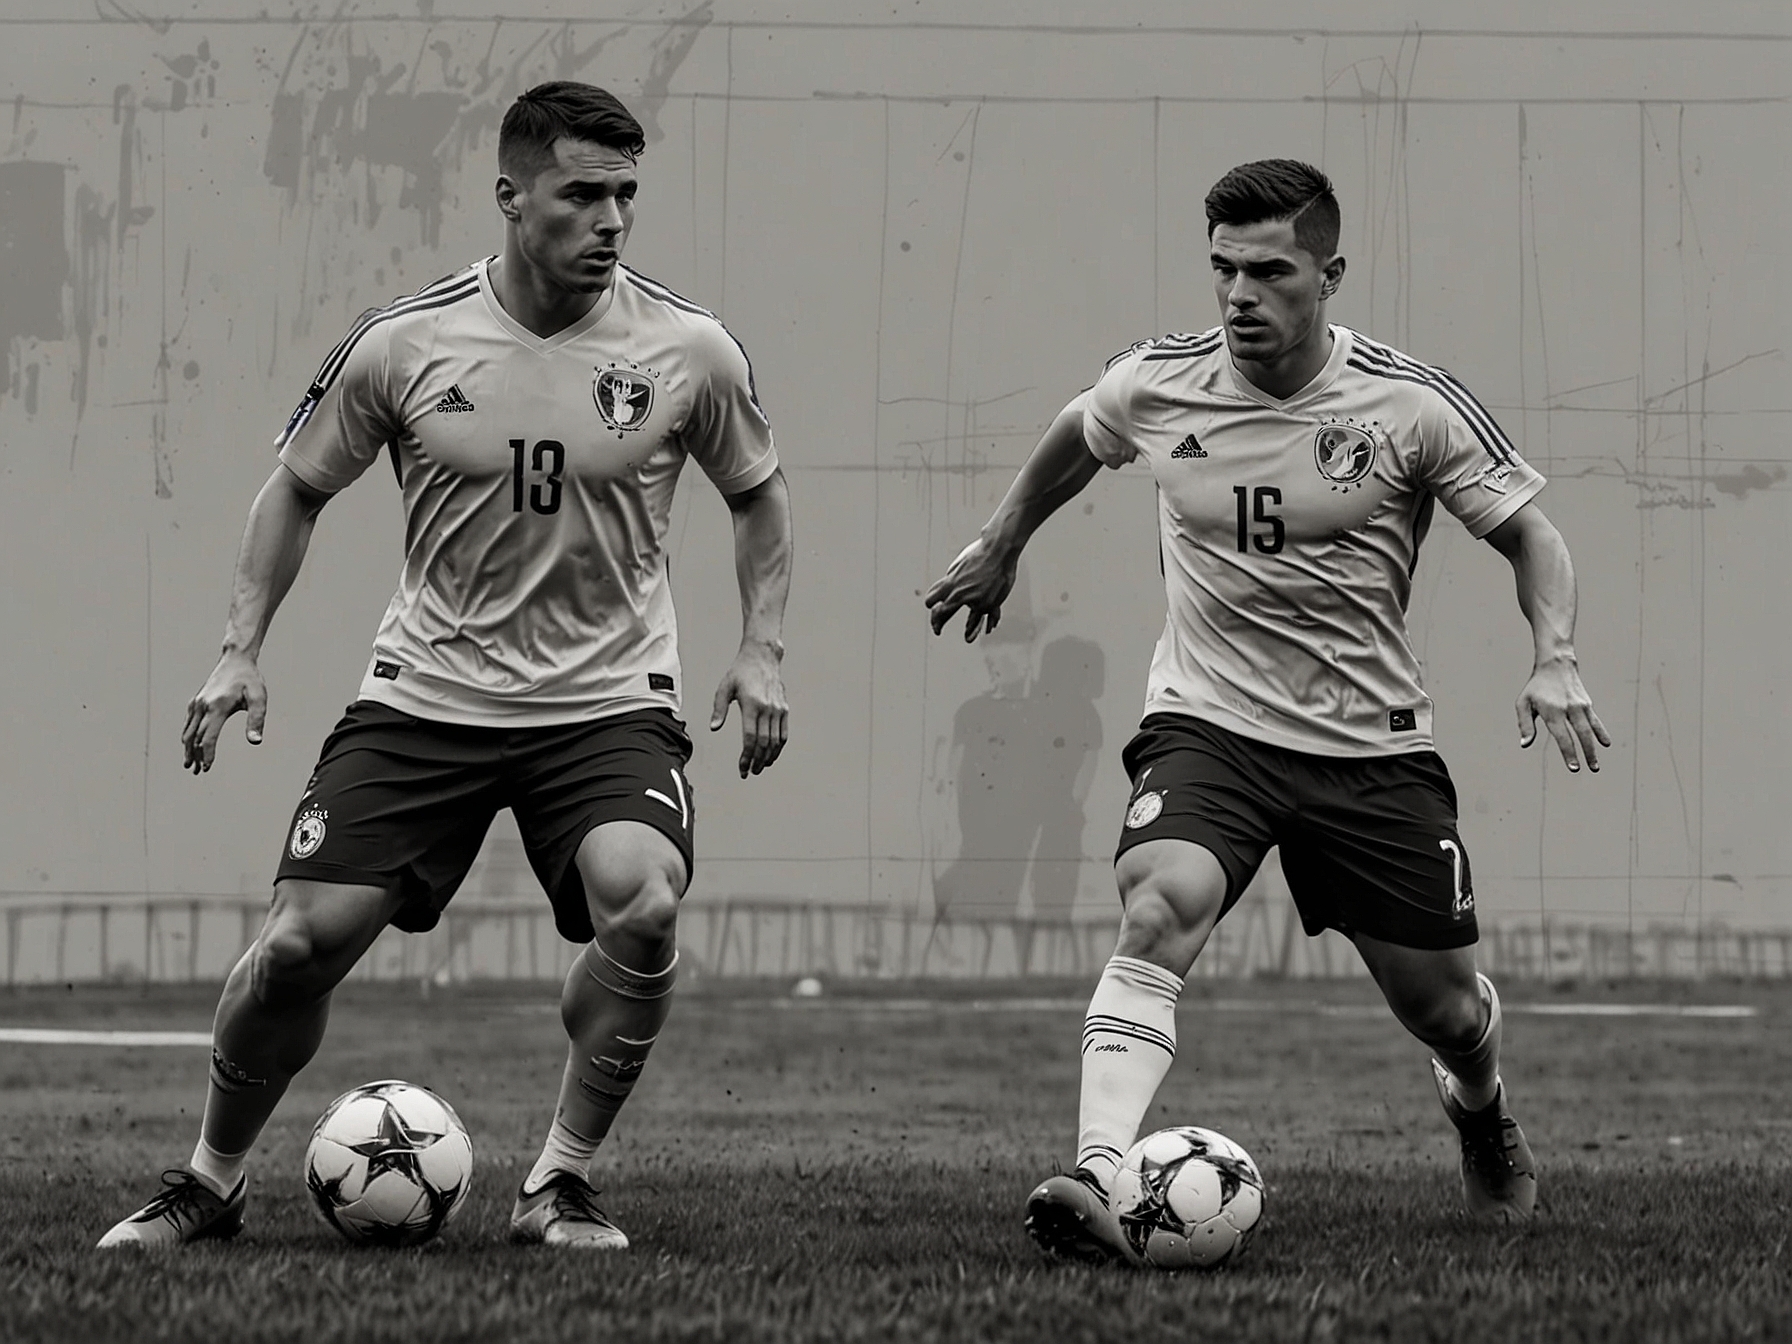 Romanian players Nicolae Stanciu and Ianis Hagi in action during a training session, showcasing their skills and preparation for the Euro 2024 qualifier against Ukraine.